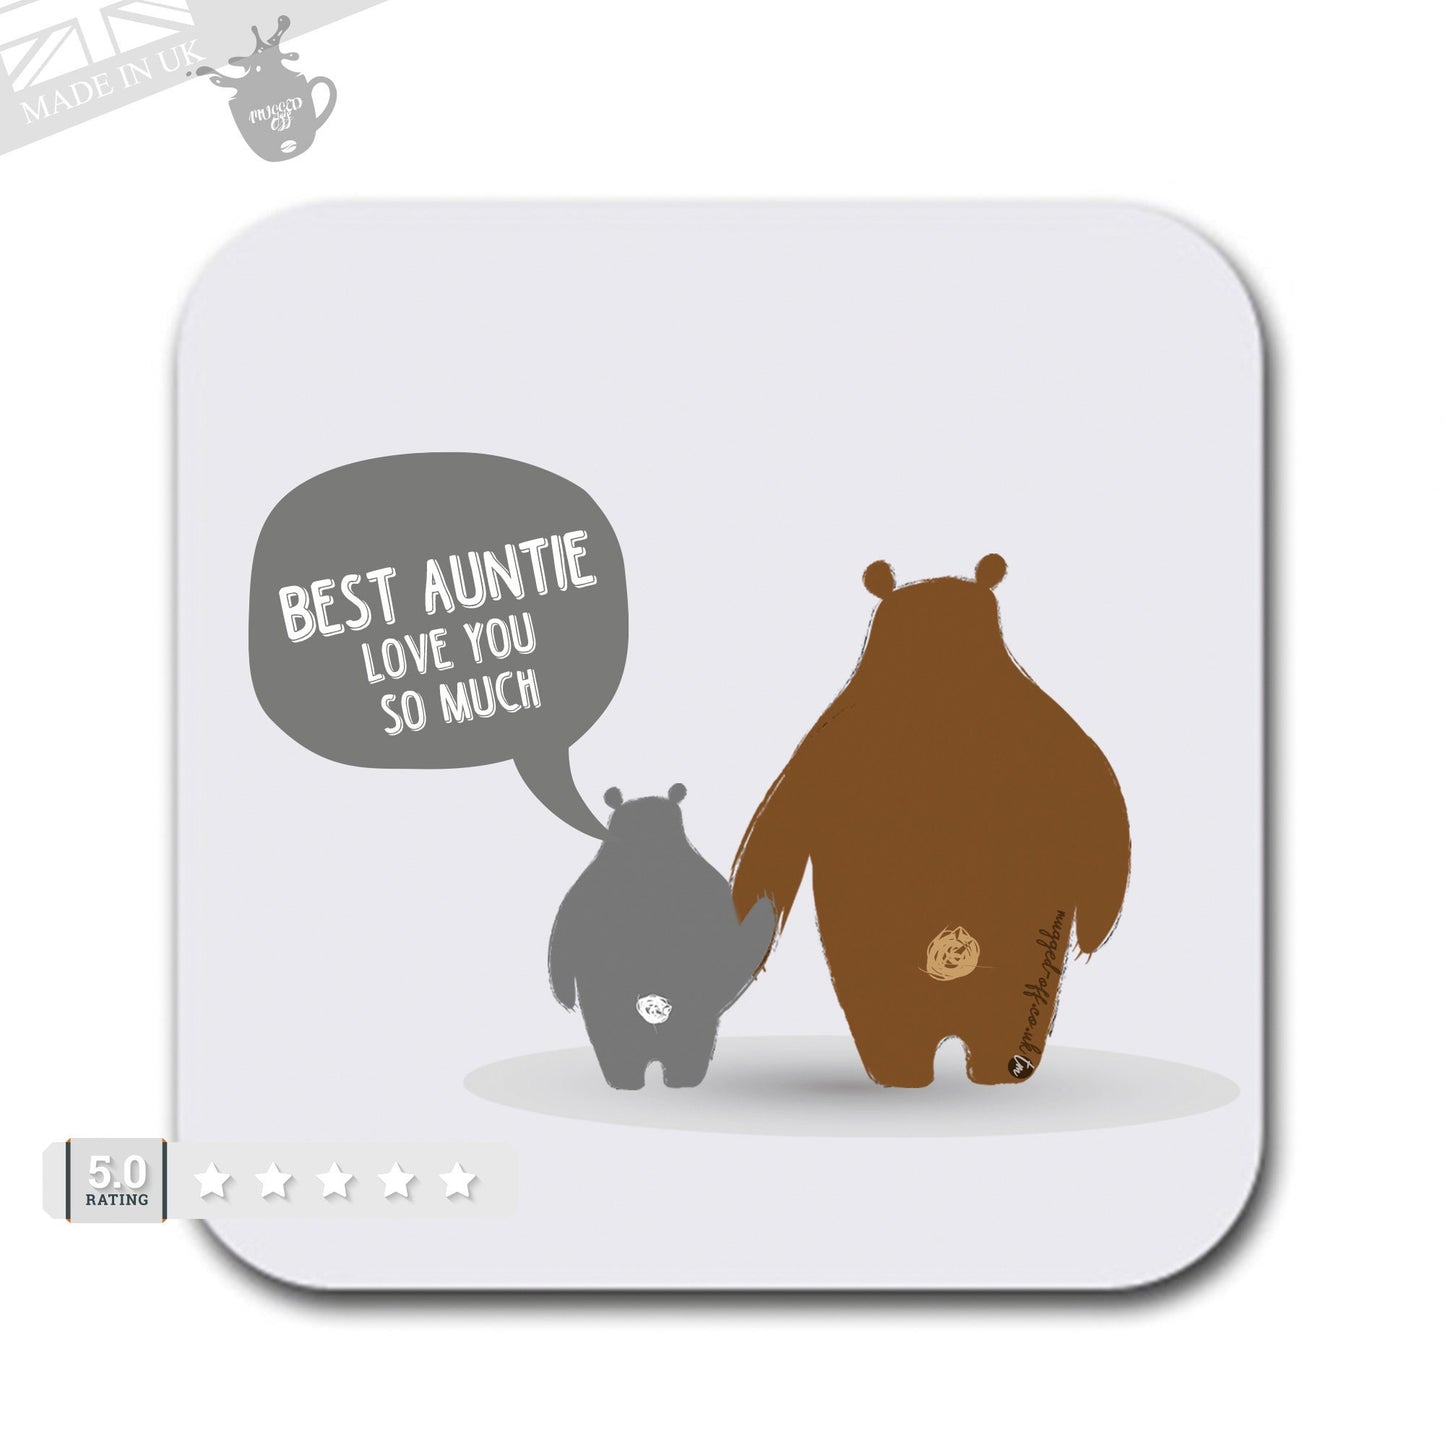 Auntie Coaster Best Auntie love you so much Xmas Birthday Christmas - Set of 2 Coasters